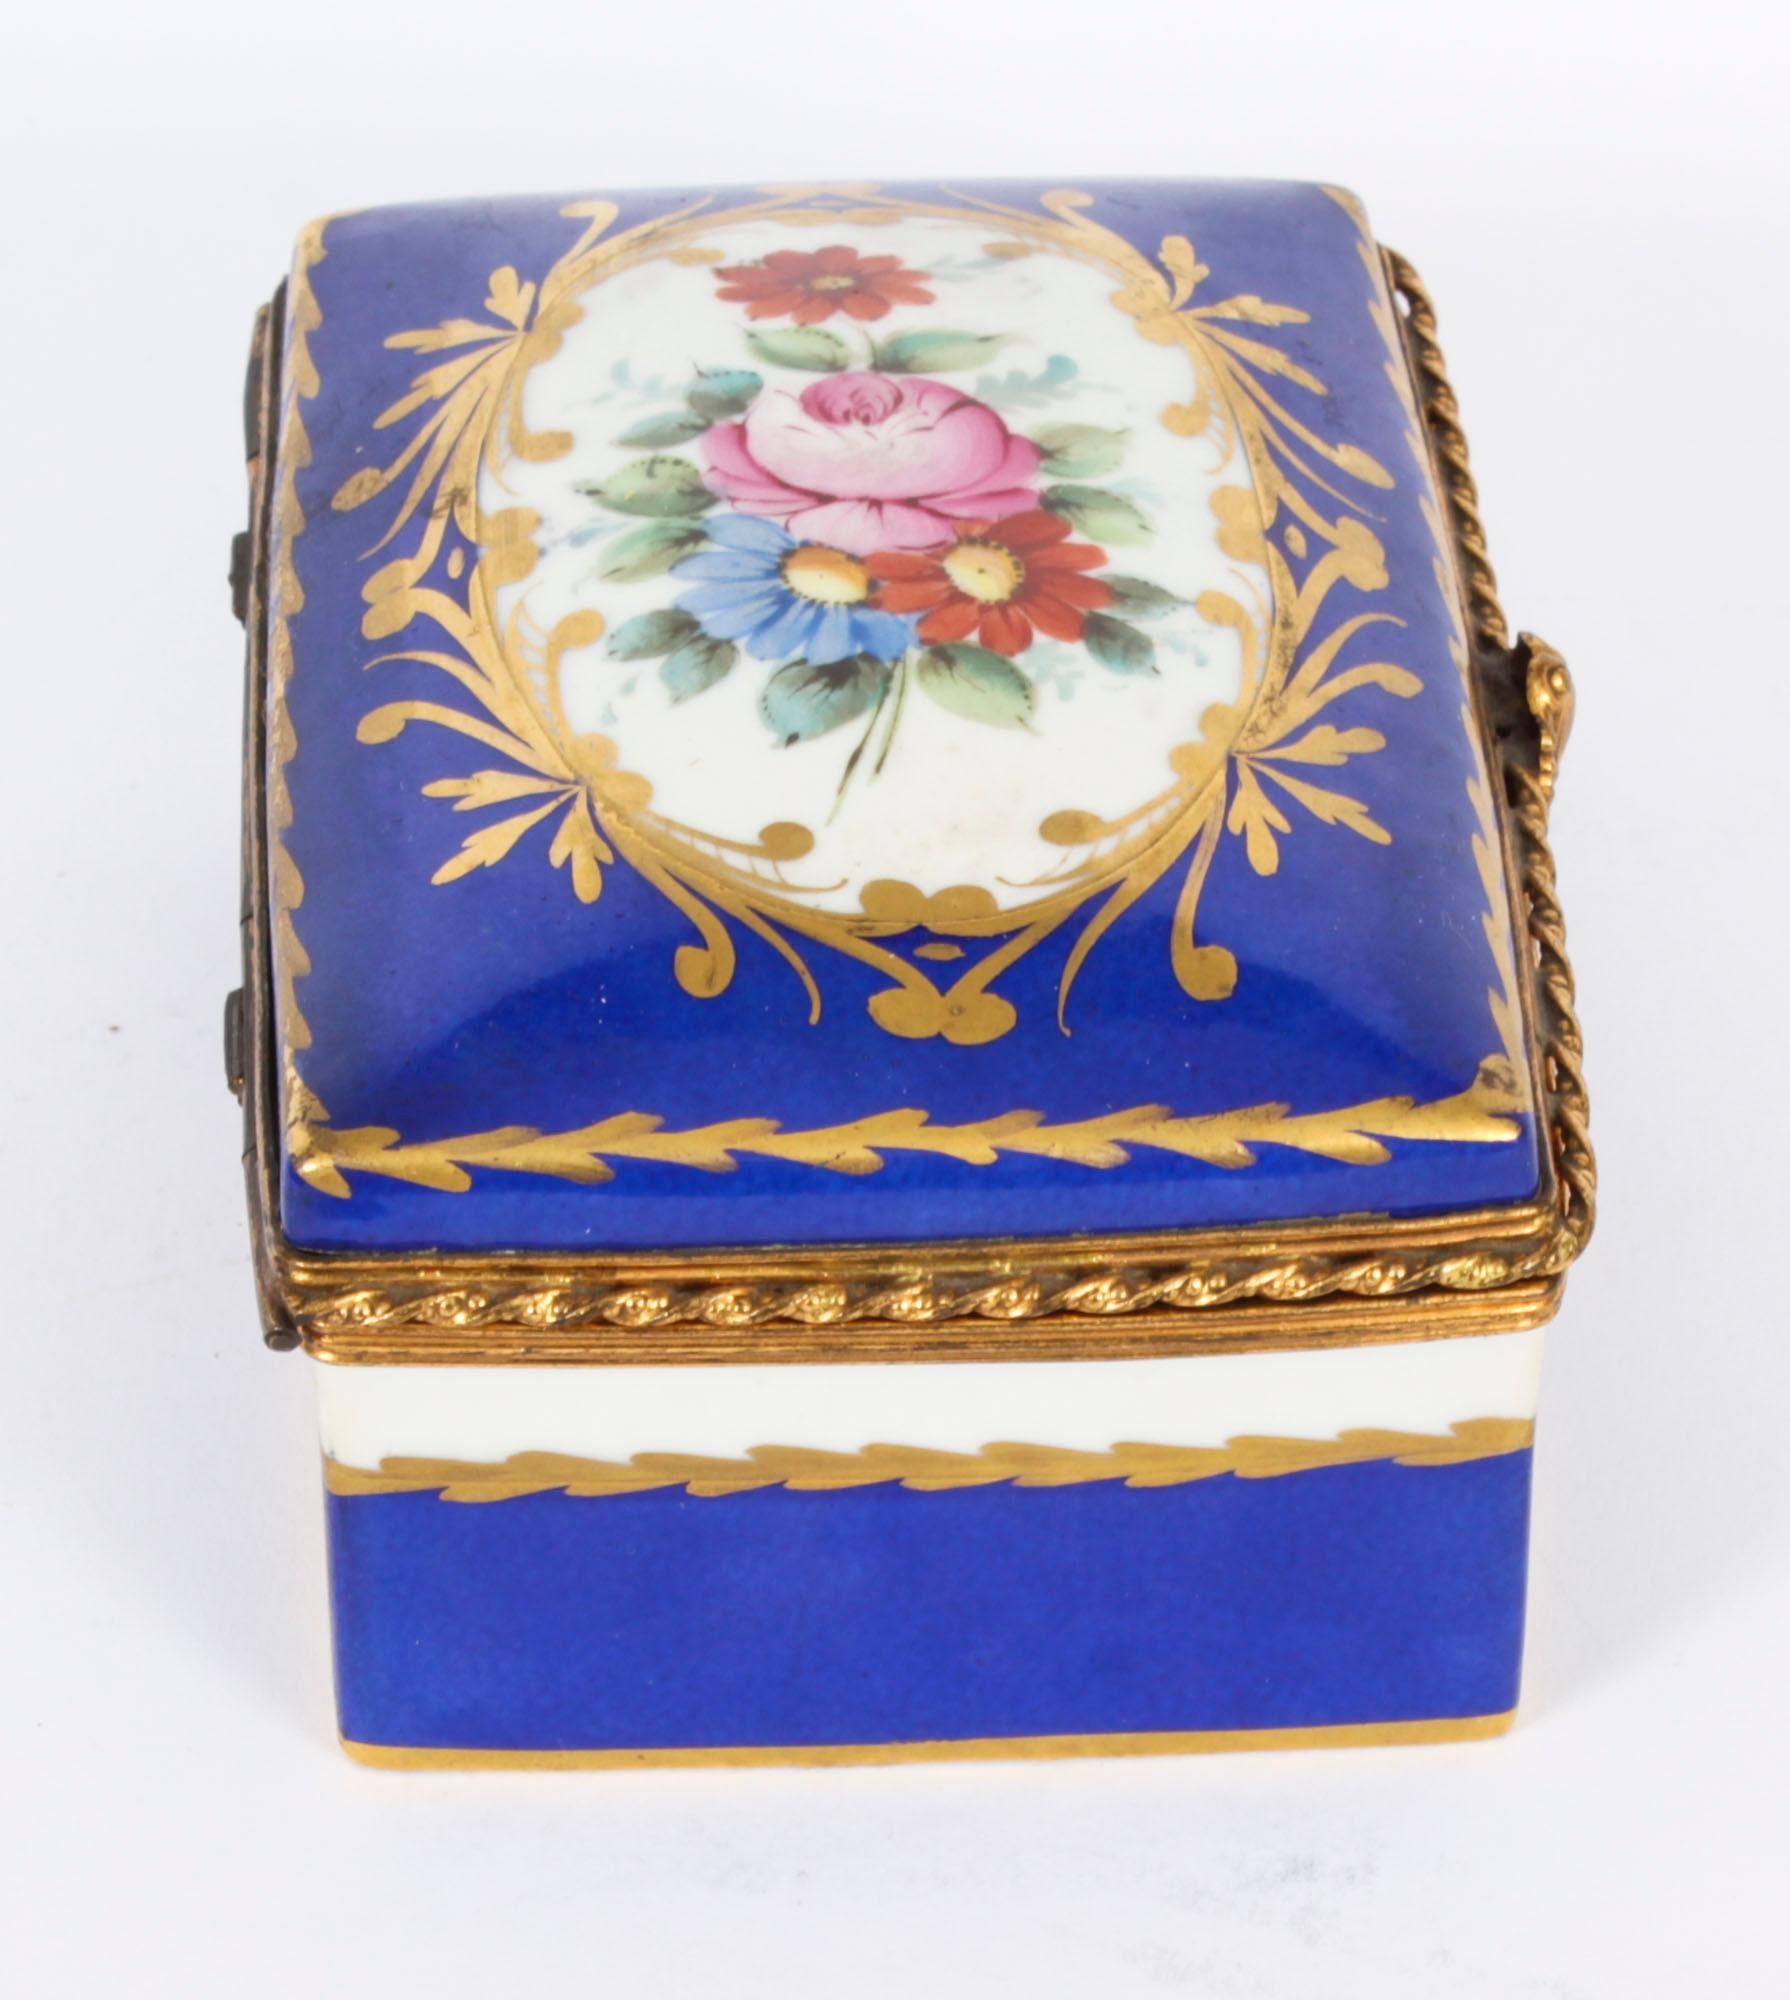 Late 19th Century Antique Limoges Royal Blue Ormolu Mounted Casket Box 19h Century For Sale